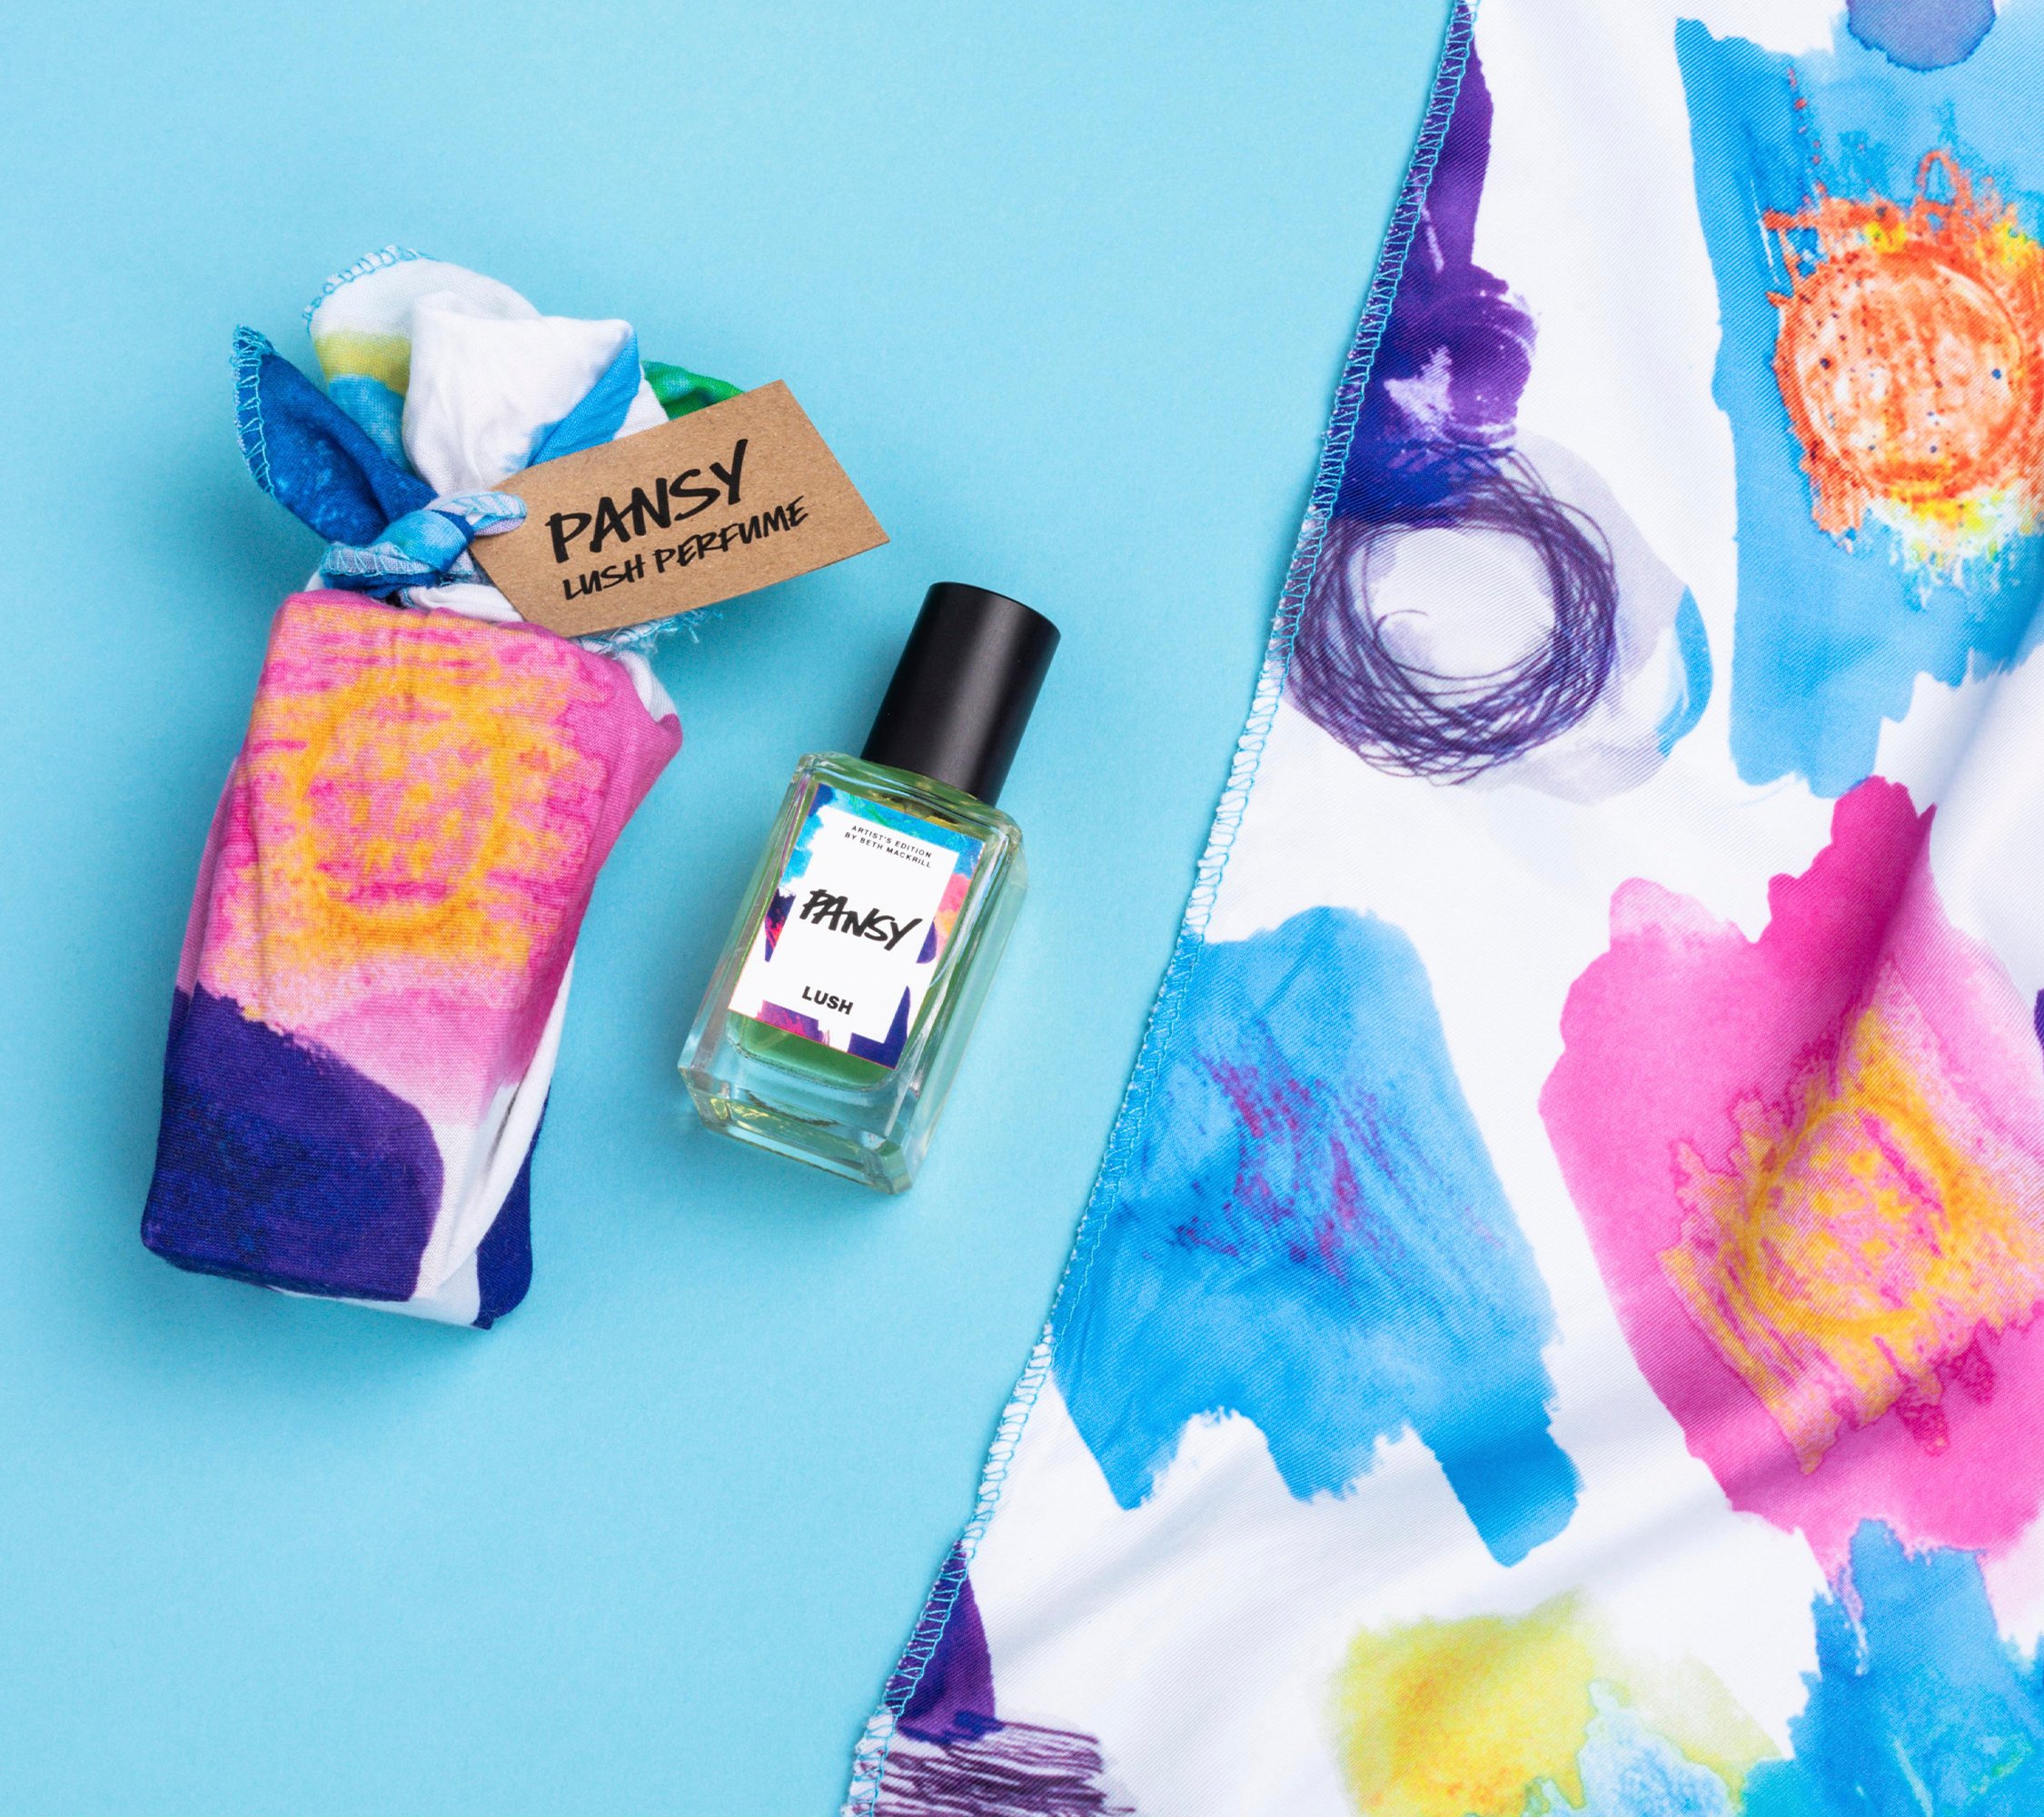 Pansy lies on a light blue background, alongside its two elements: a small bottle of Pansy perfume and a colourful knot wrap.